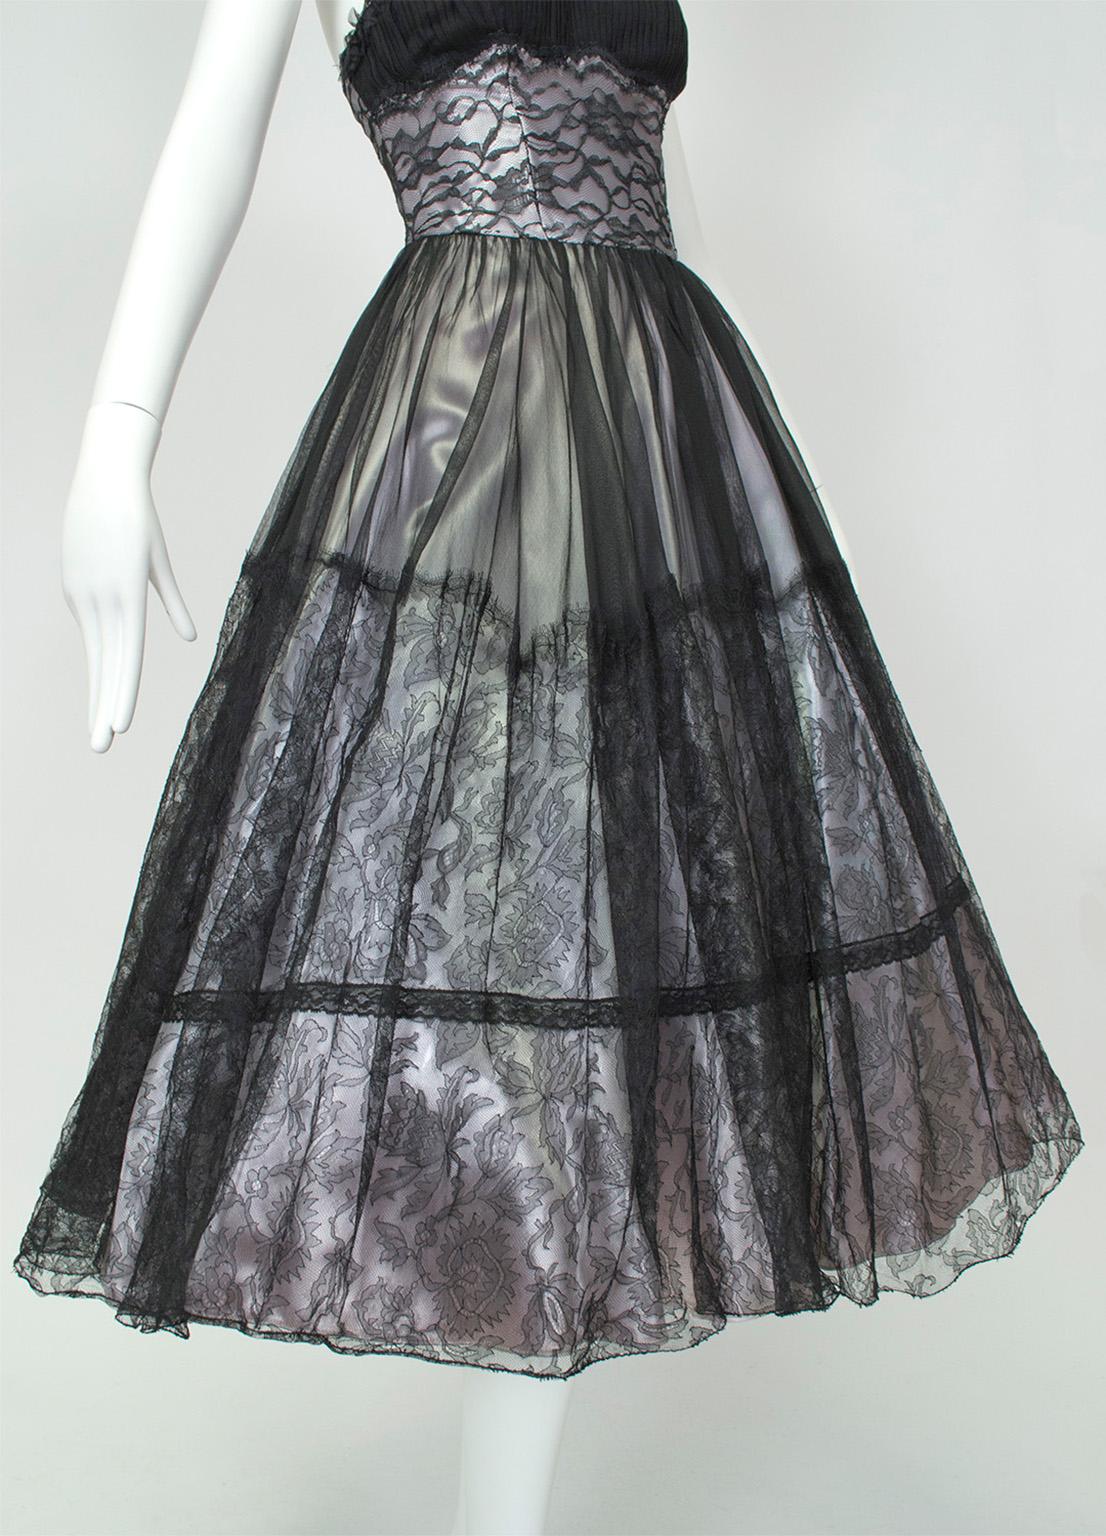 Black and Silver *Larger Size* Ombré New Look Strapless Party Dress – L, 1950s For Sale 2